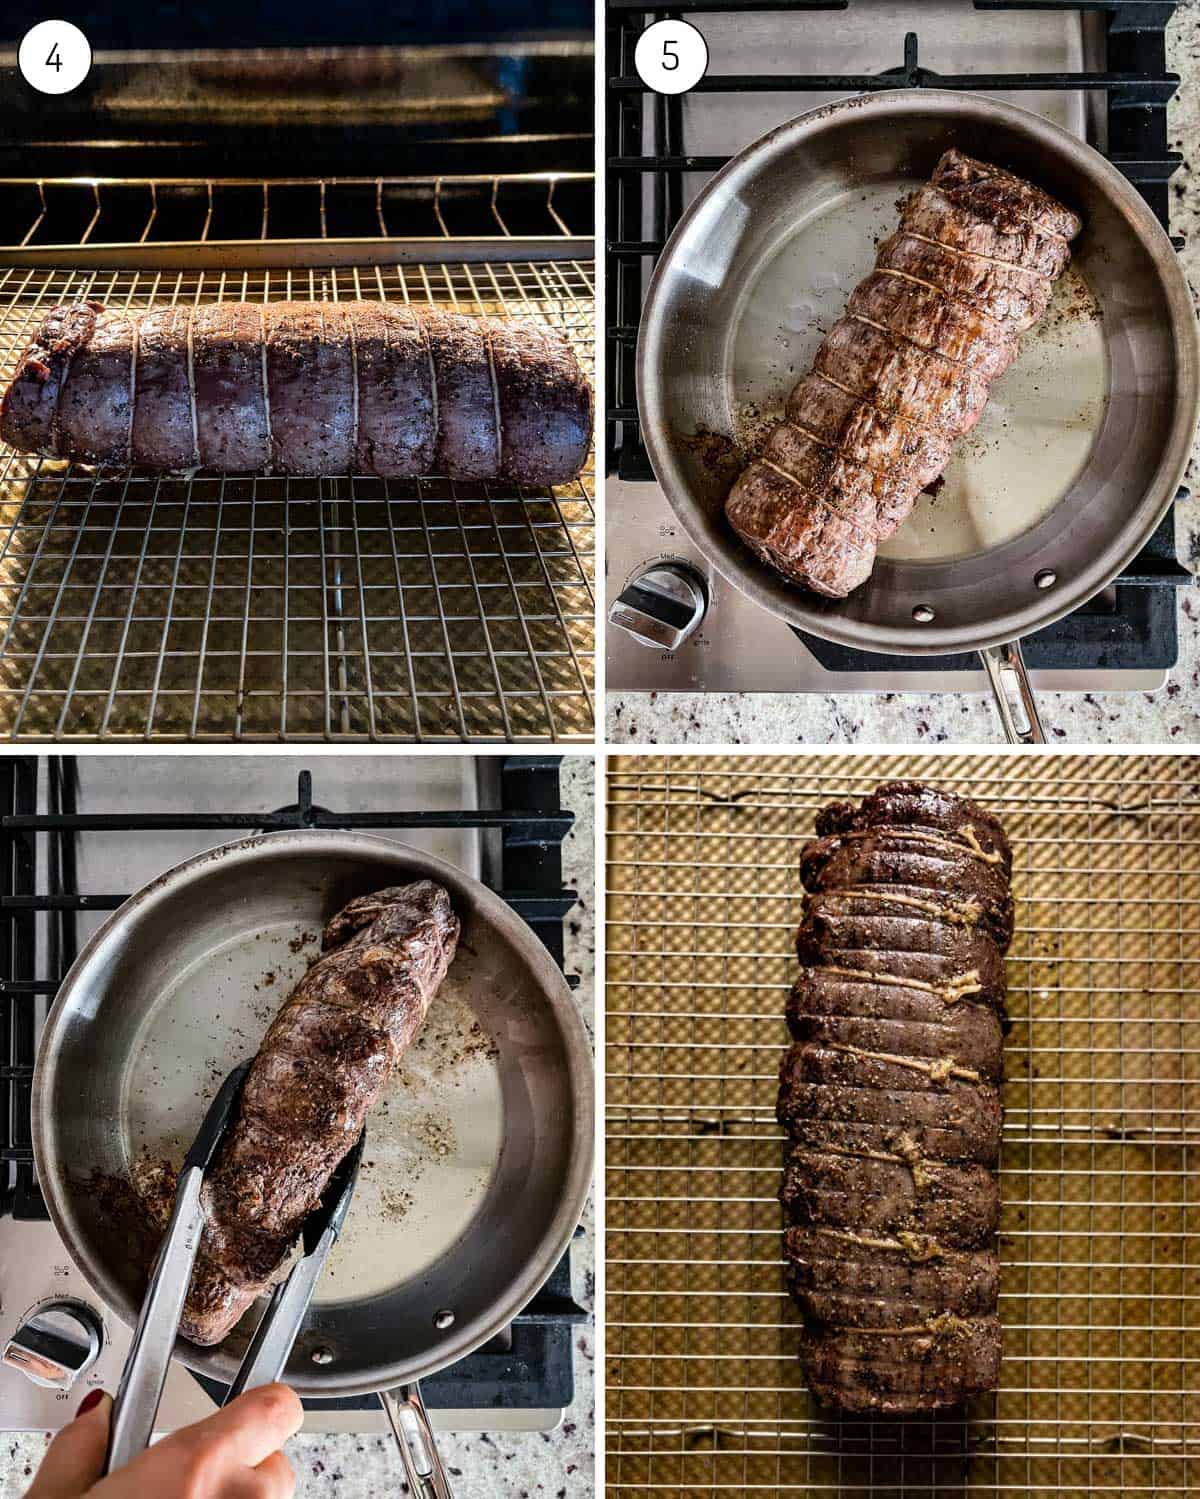 A person showing how to sear beef tenderloin from the top view.